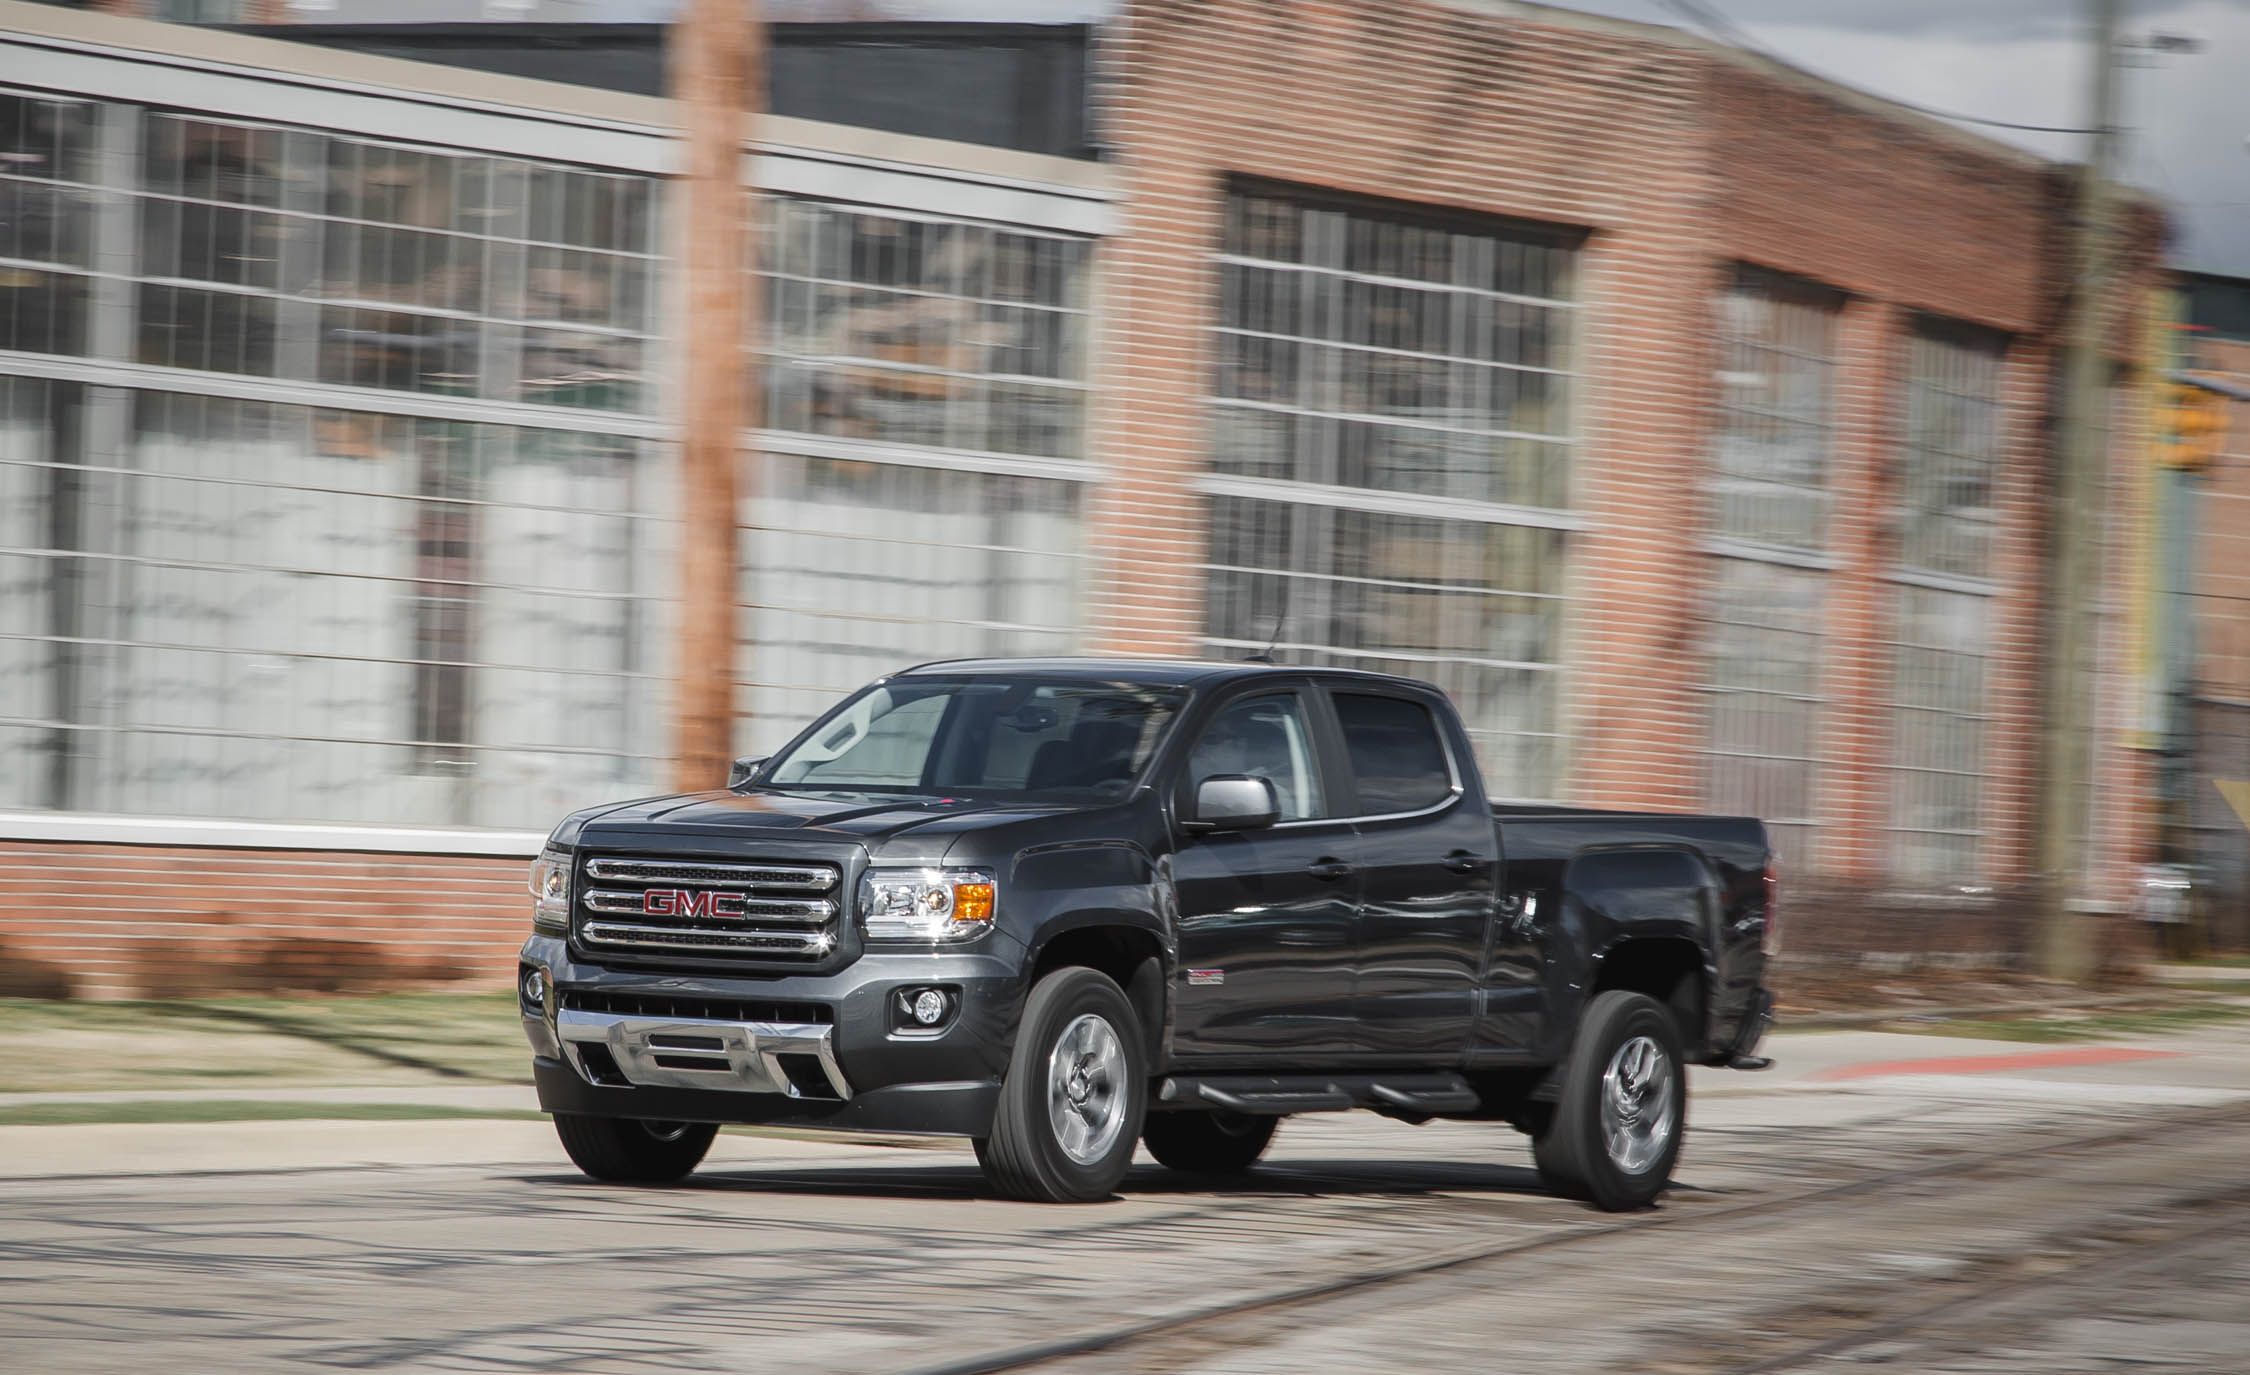 GMC Might Build a Jeep Wrangler Competitor on the Colorado/Canyon Chassis